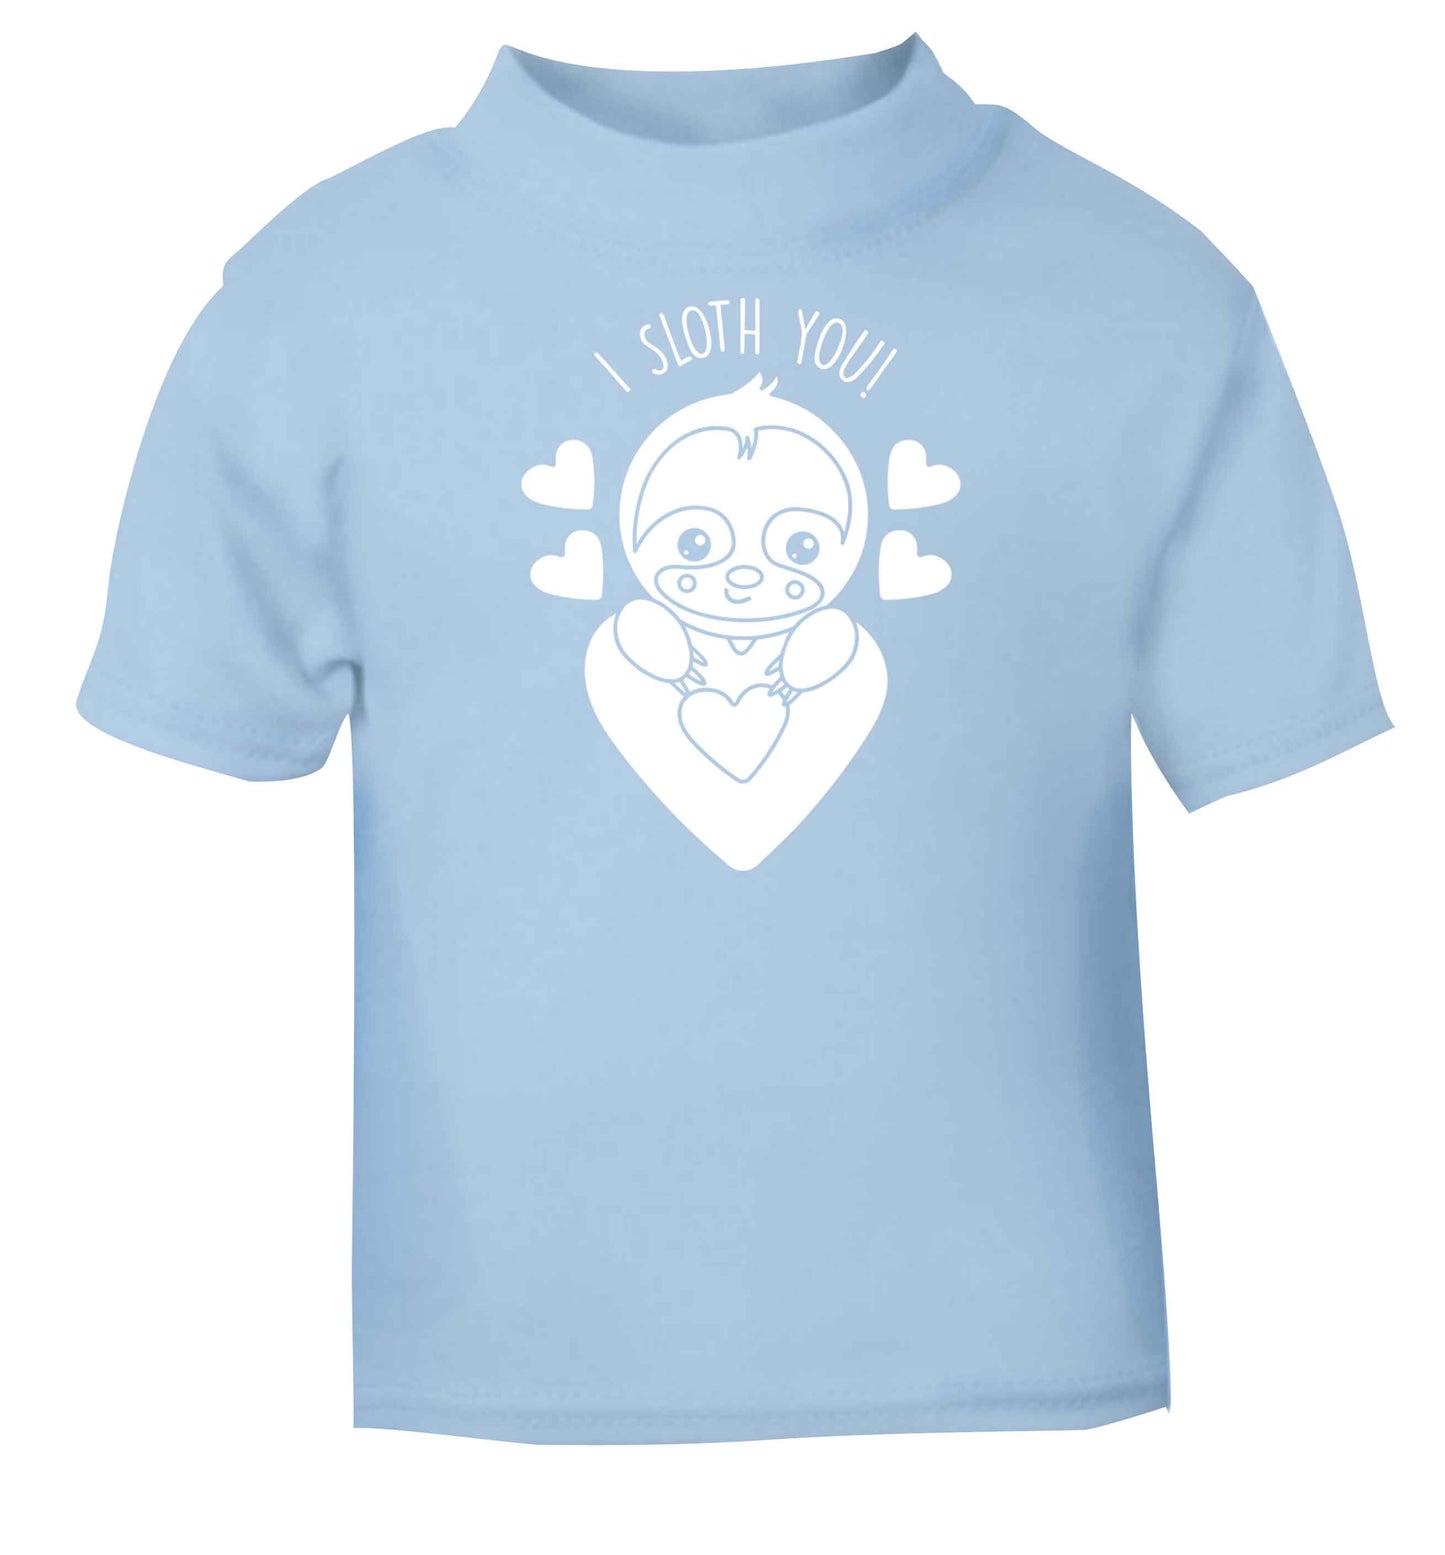 I sloth you light blue baby toddler Tshirt 2 Years